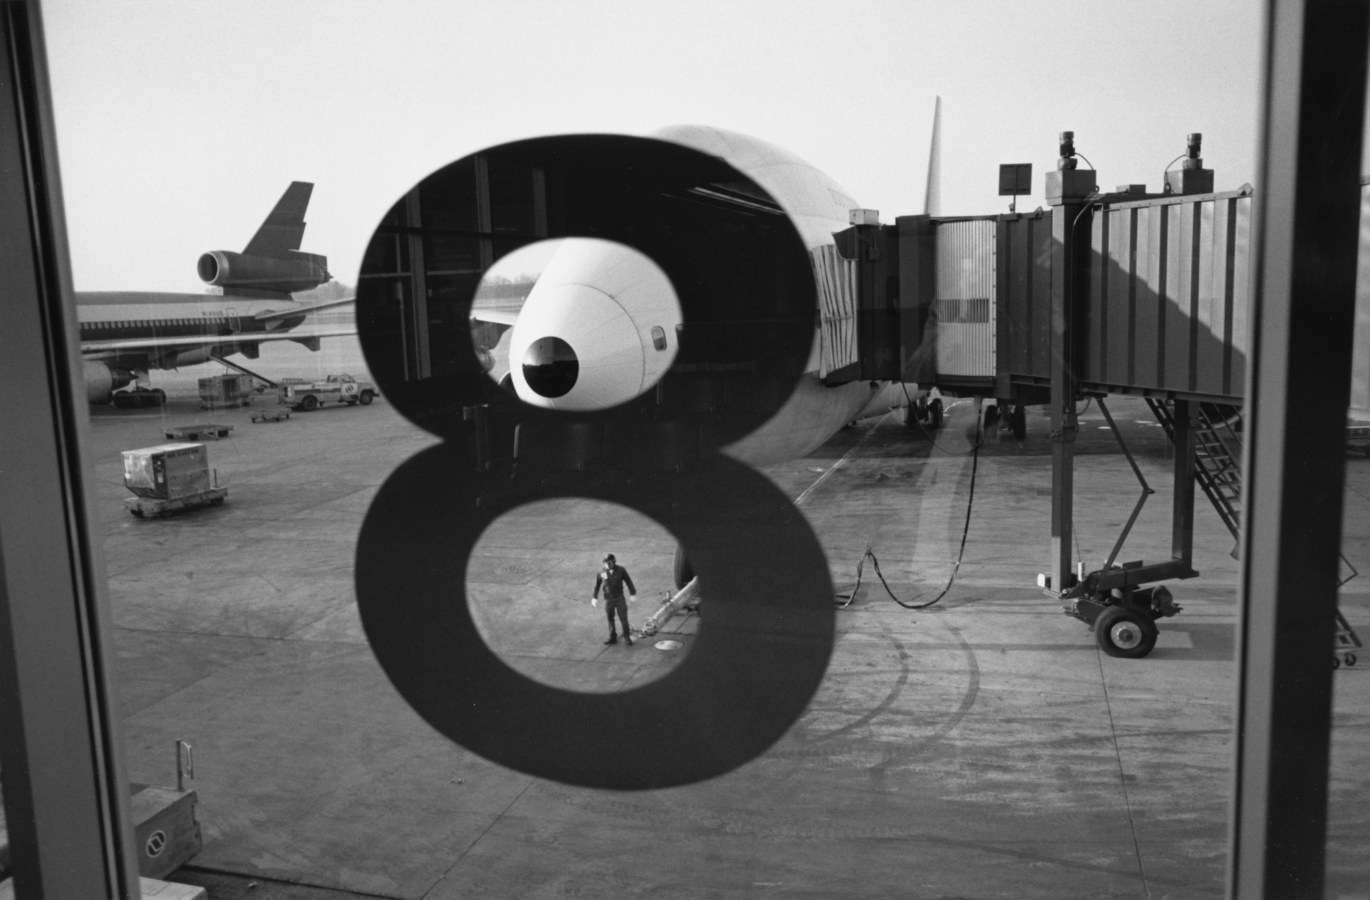 Black and white photograph looking out an airport window with the number 8 on it